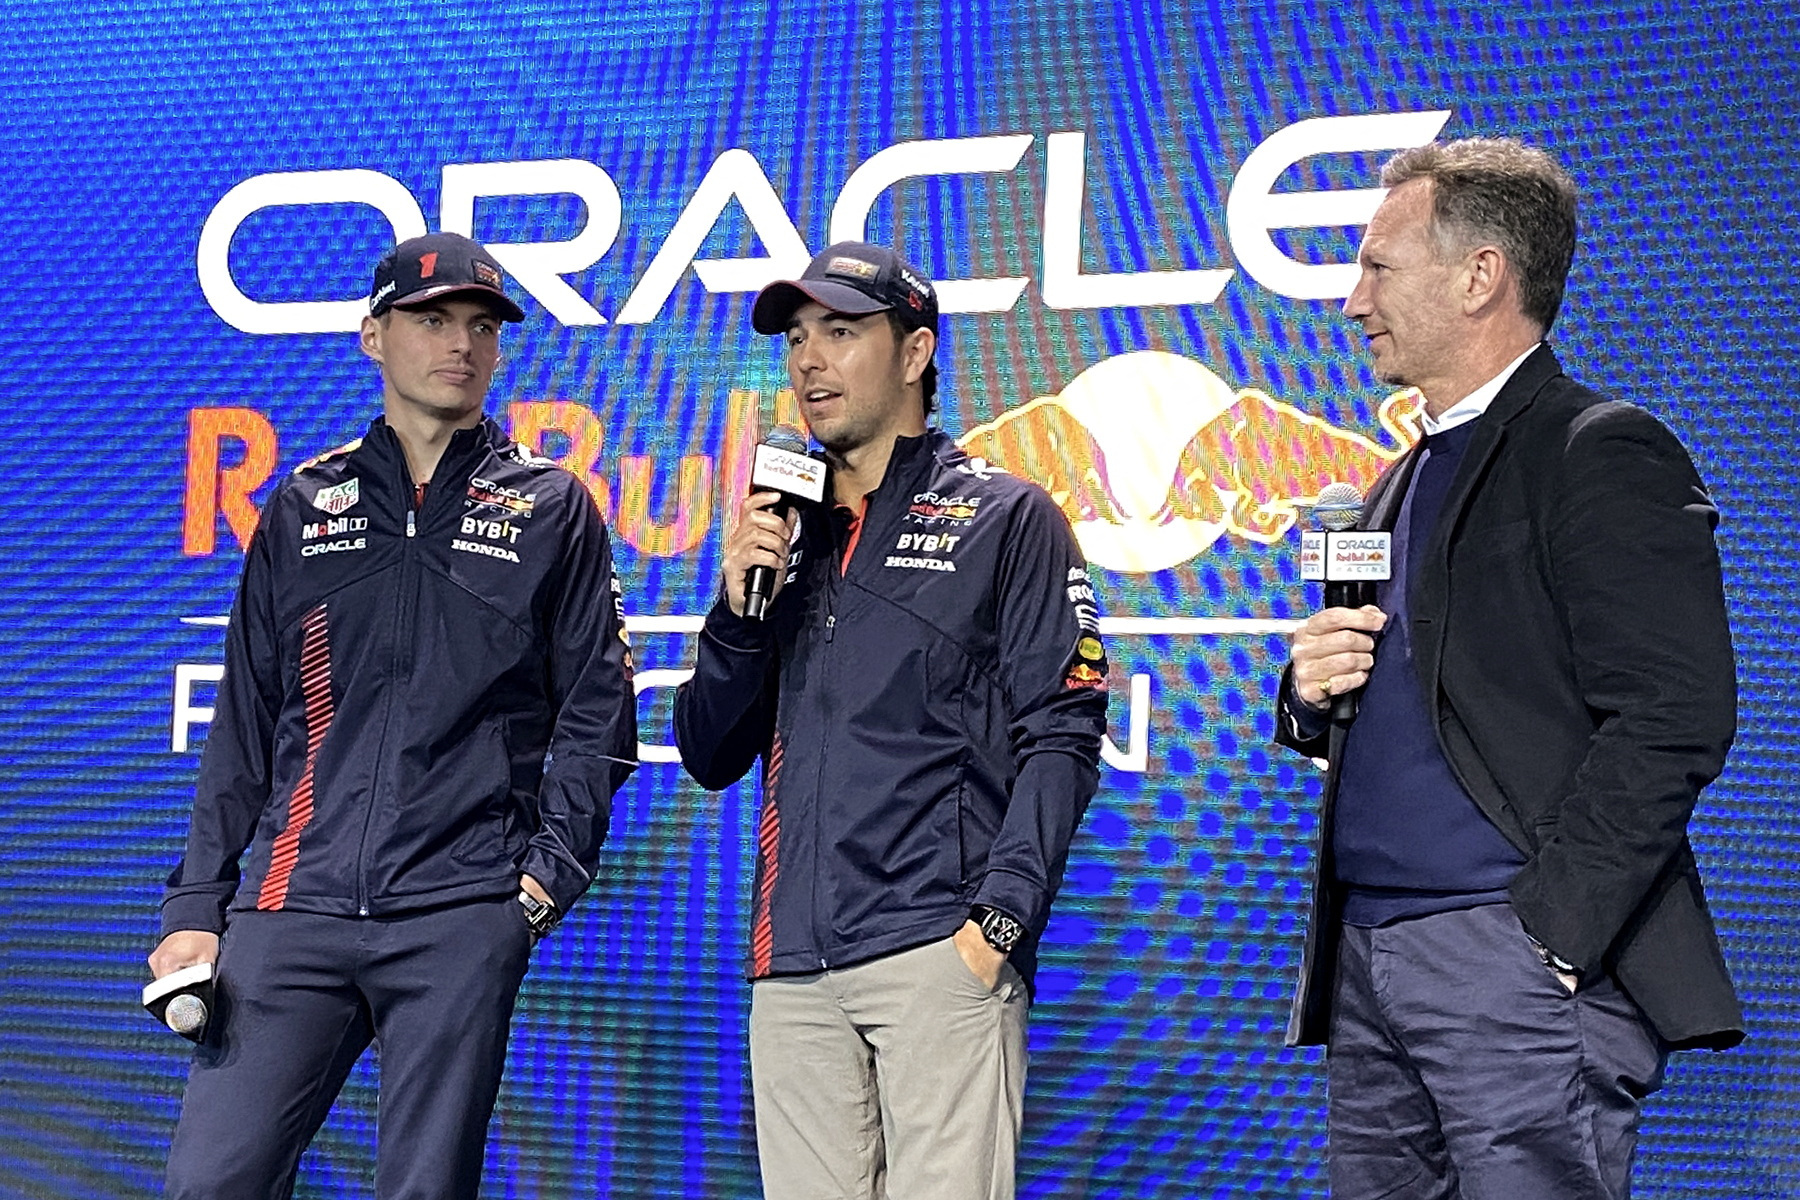 Drivers Max Verstappen, Sergio Perez and team principal Christian Horner of Red Bull F-1 Racing Team attend the unveil of the RB19 car in a partnership with Ford during a launch event in New York City, U.S., February 3, 2023. REUTERS/Christine Kiernan